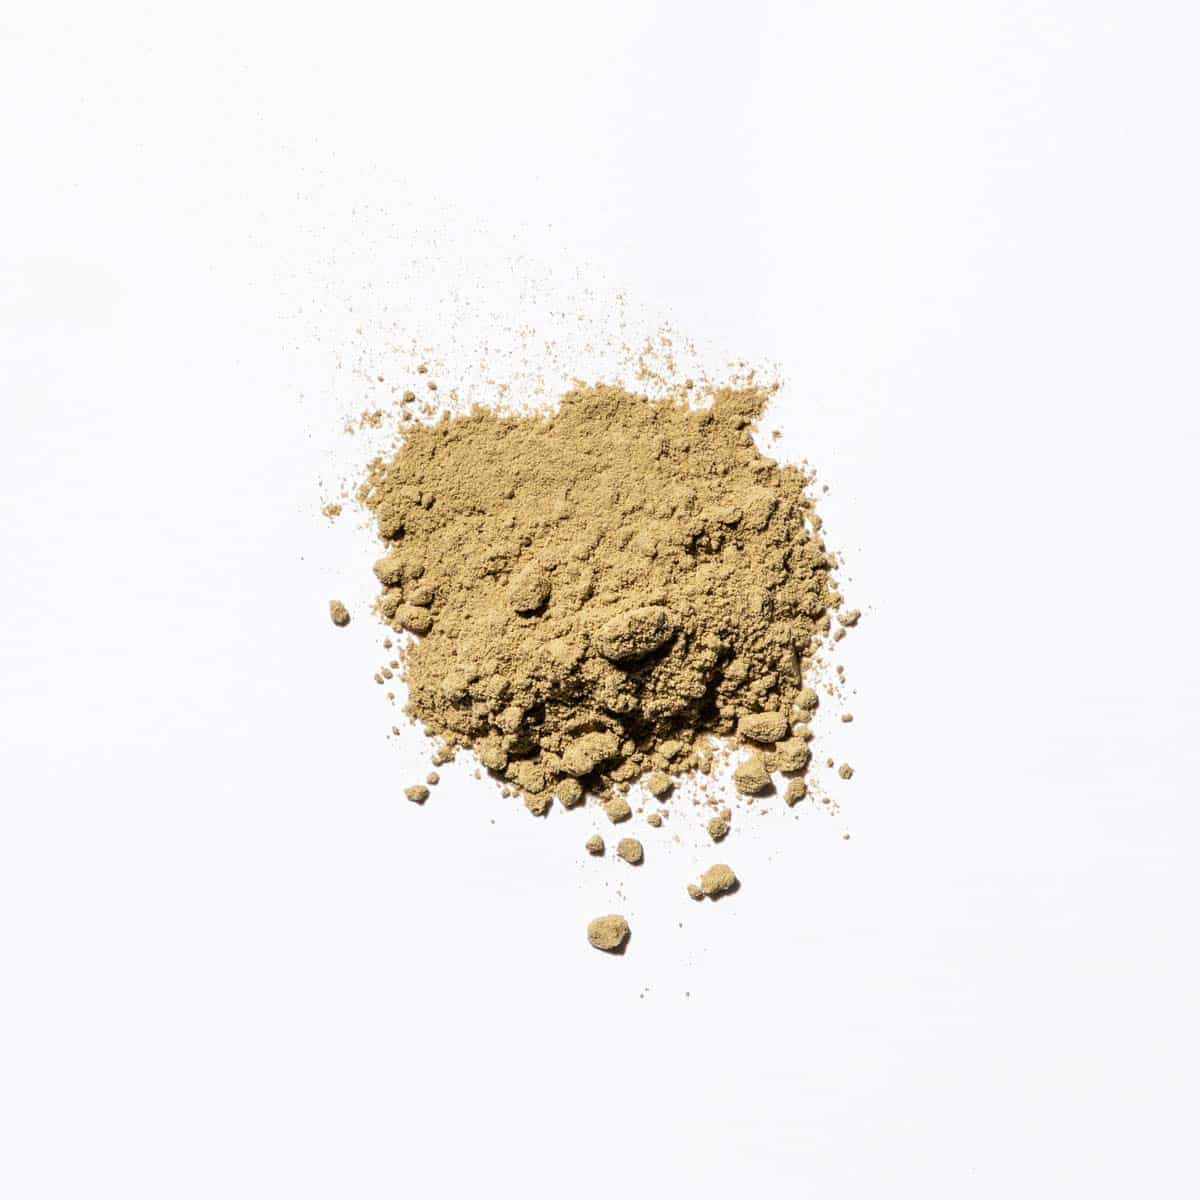 dried kava root powder on white background